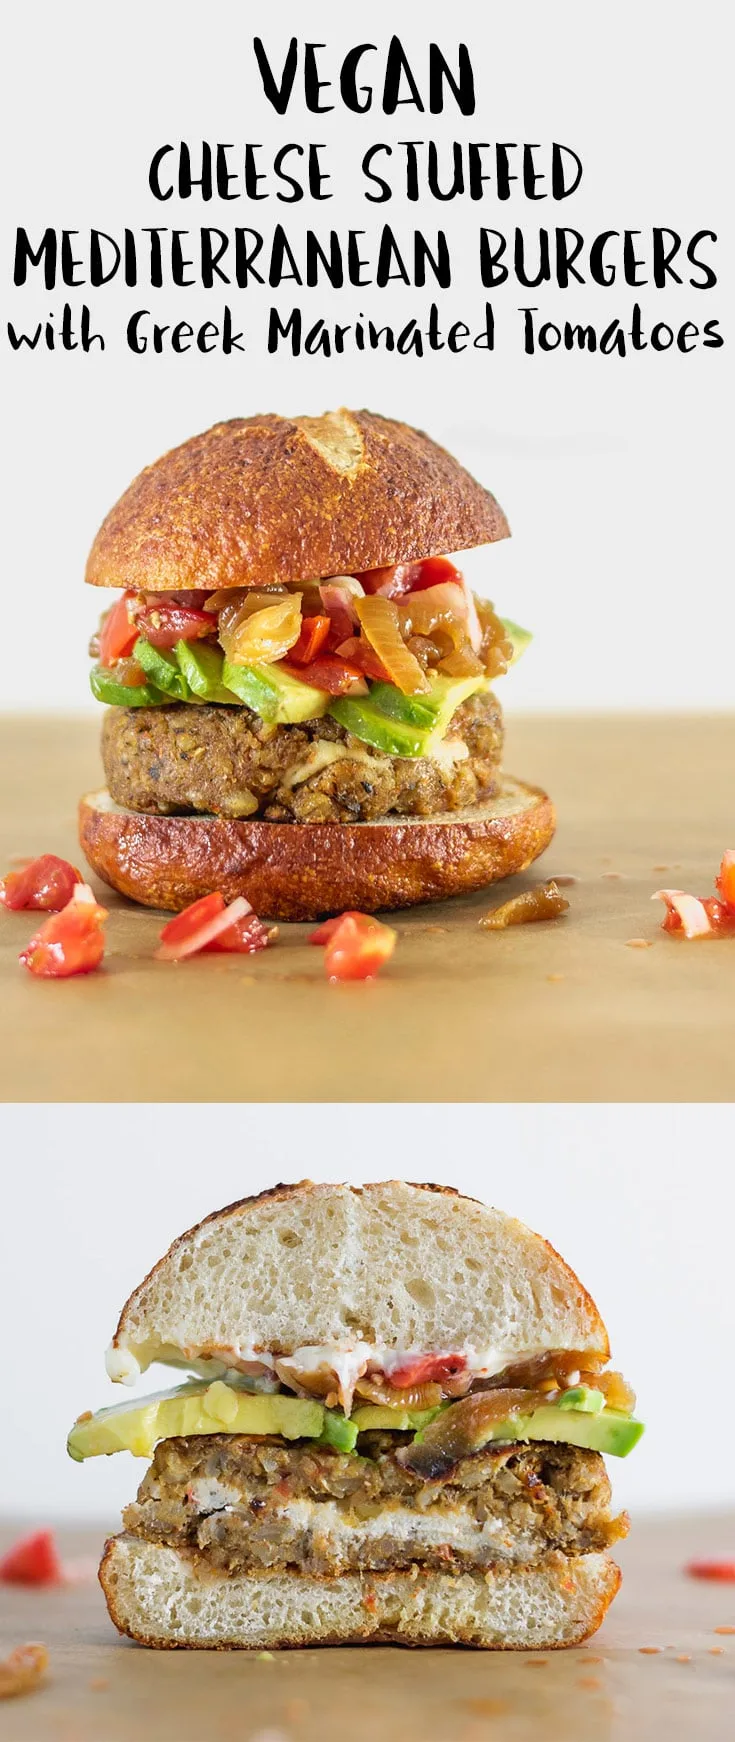 These chewy, juicy vegan chickpea burgers are packed with mediterranean flavor, stuffed with almond cheese, and served with greek marinated tomatoes | thecuriouschickpea.com #vegan #veganburger #veggieburger